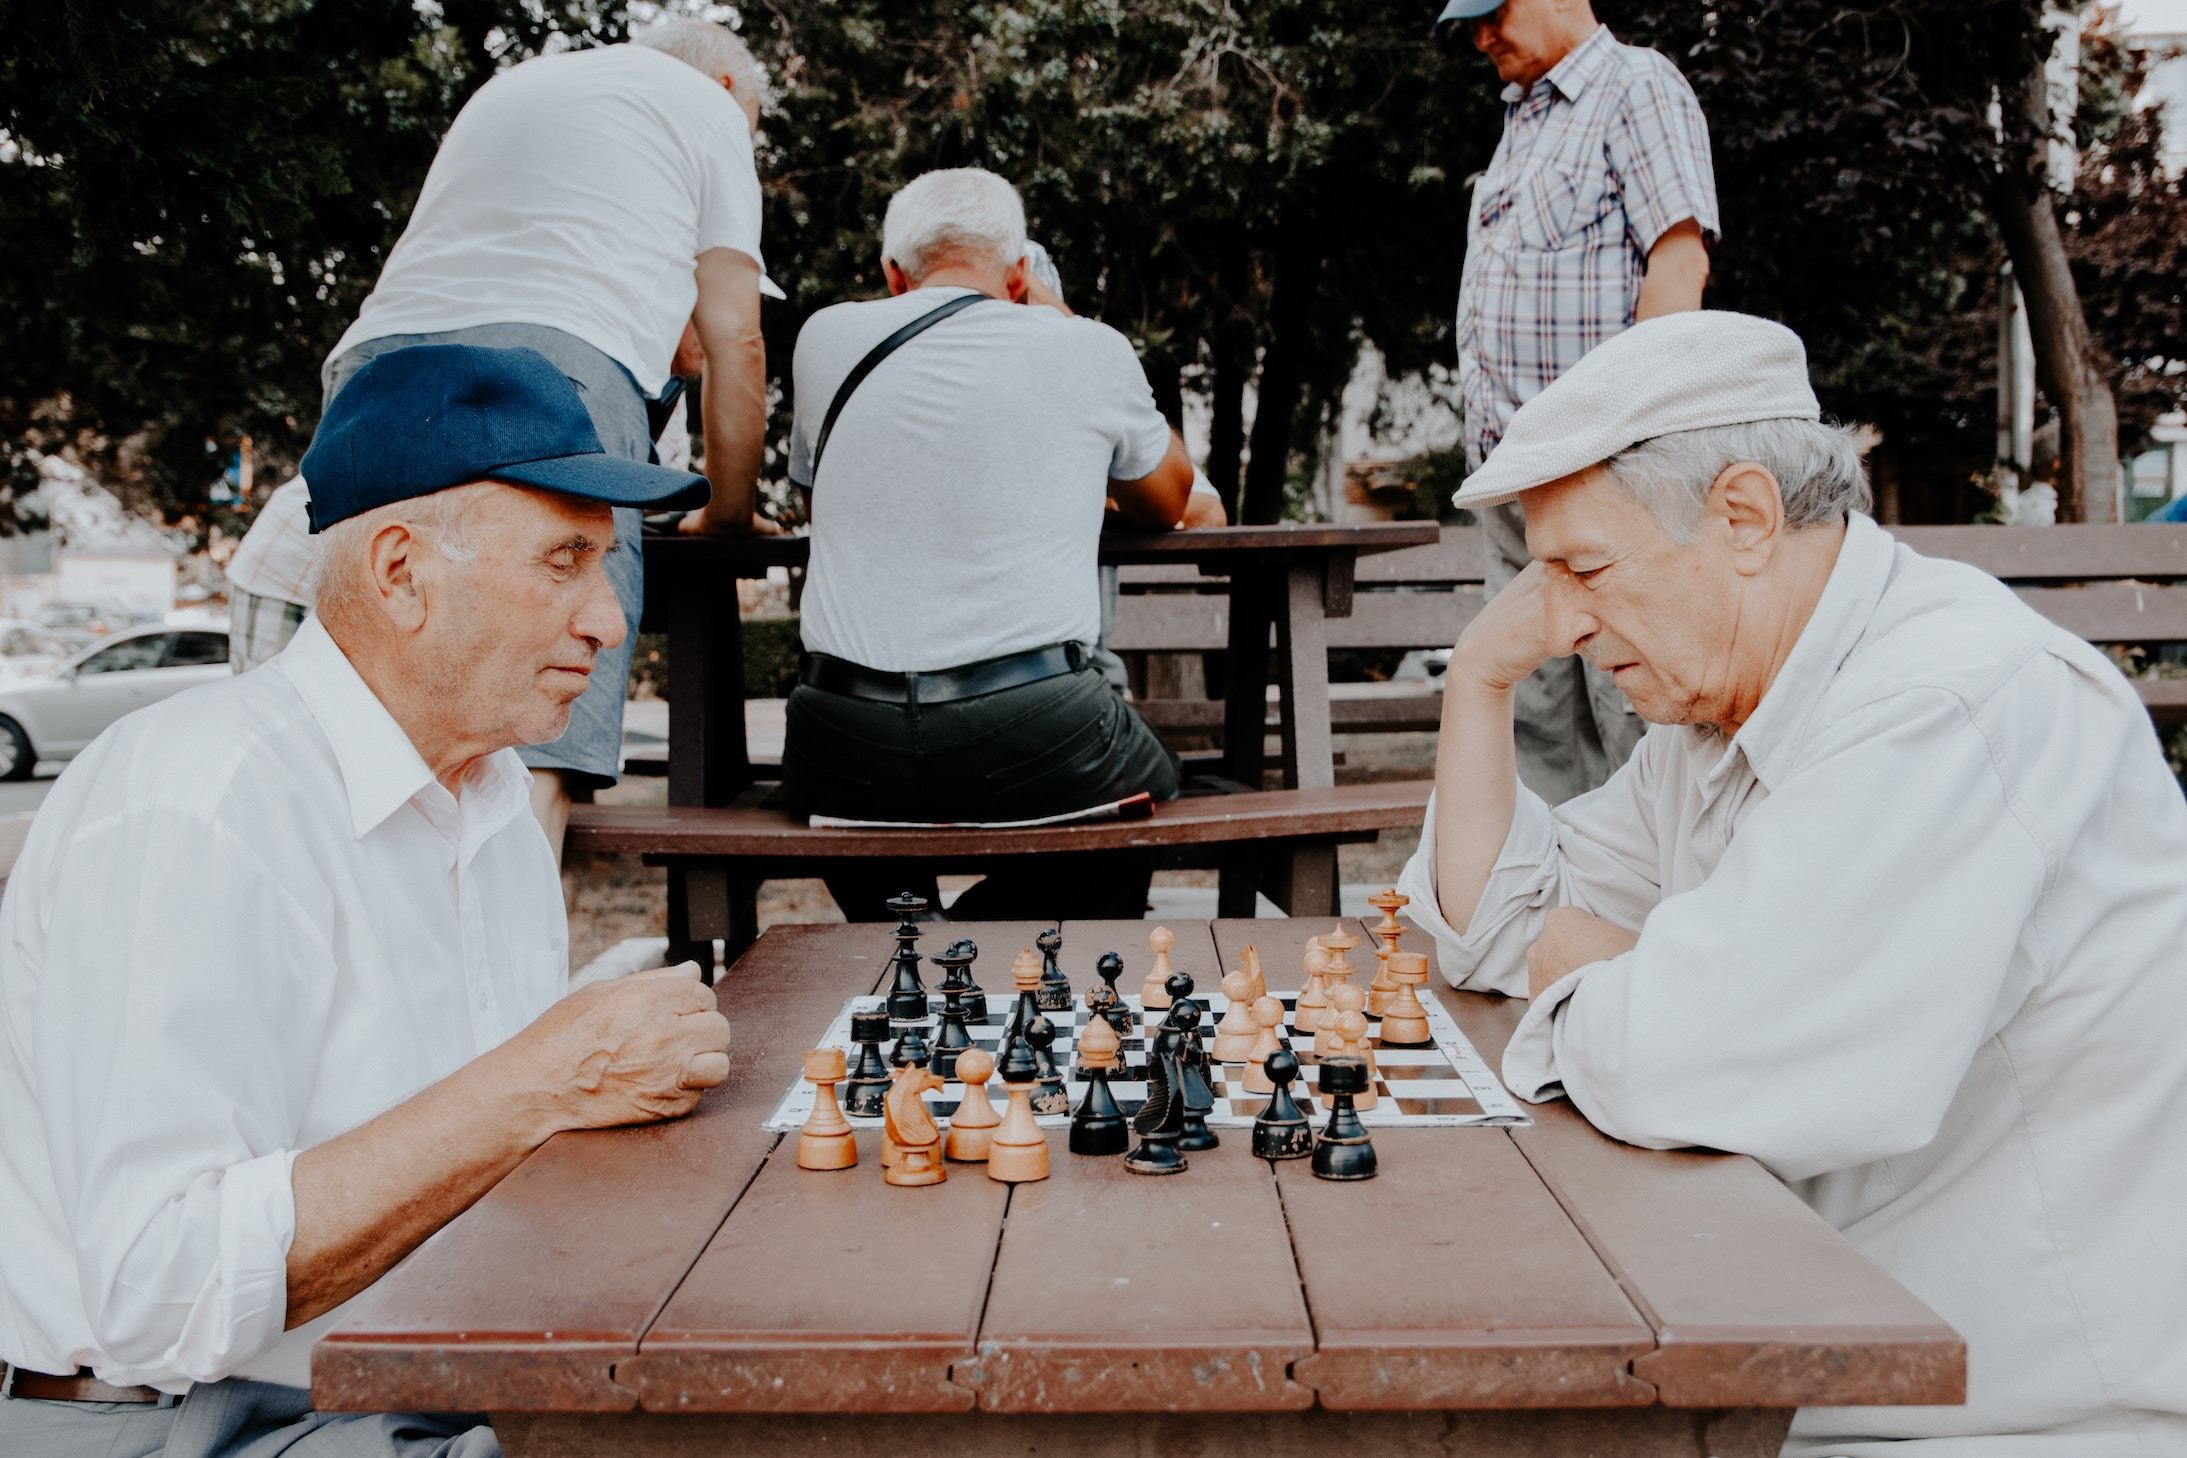 Two elderly men playing chess in a park